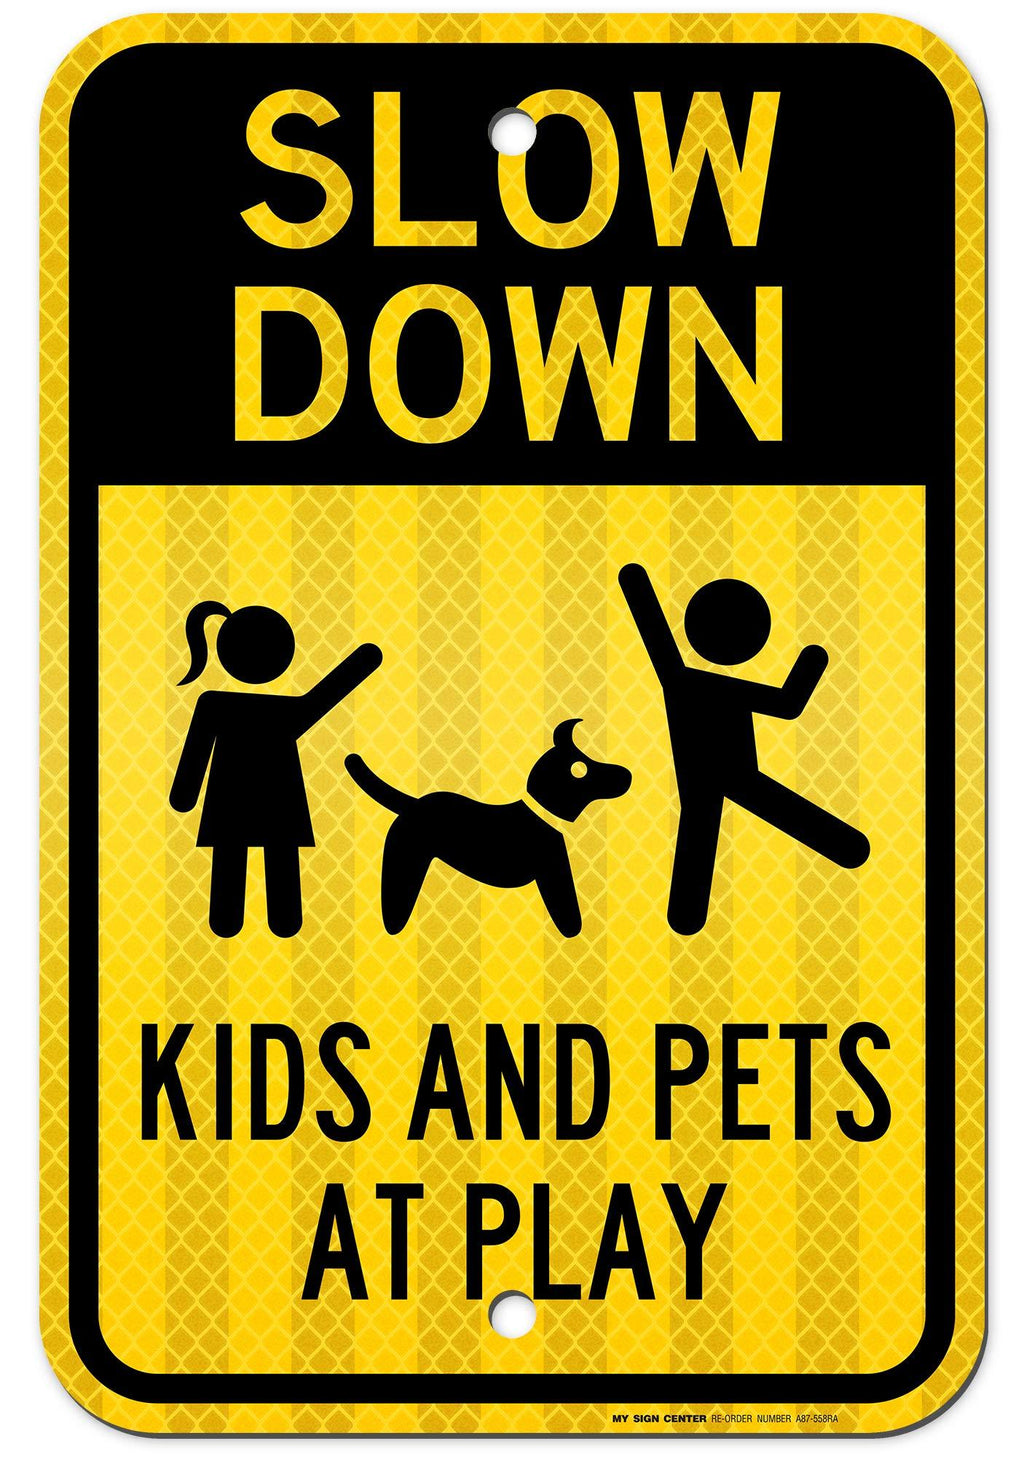 Slow Down Kids at Play Sign , Large 12” x 18” 3M Reflective (EGP) Aluminum, Easy Mounting, Rust-Free/Fade Resistance, Indoor/Outdoor, USA Made By MY SIGN CENTER